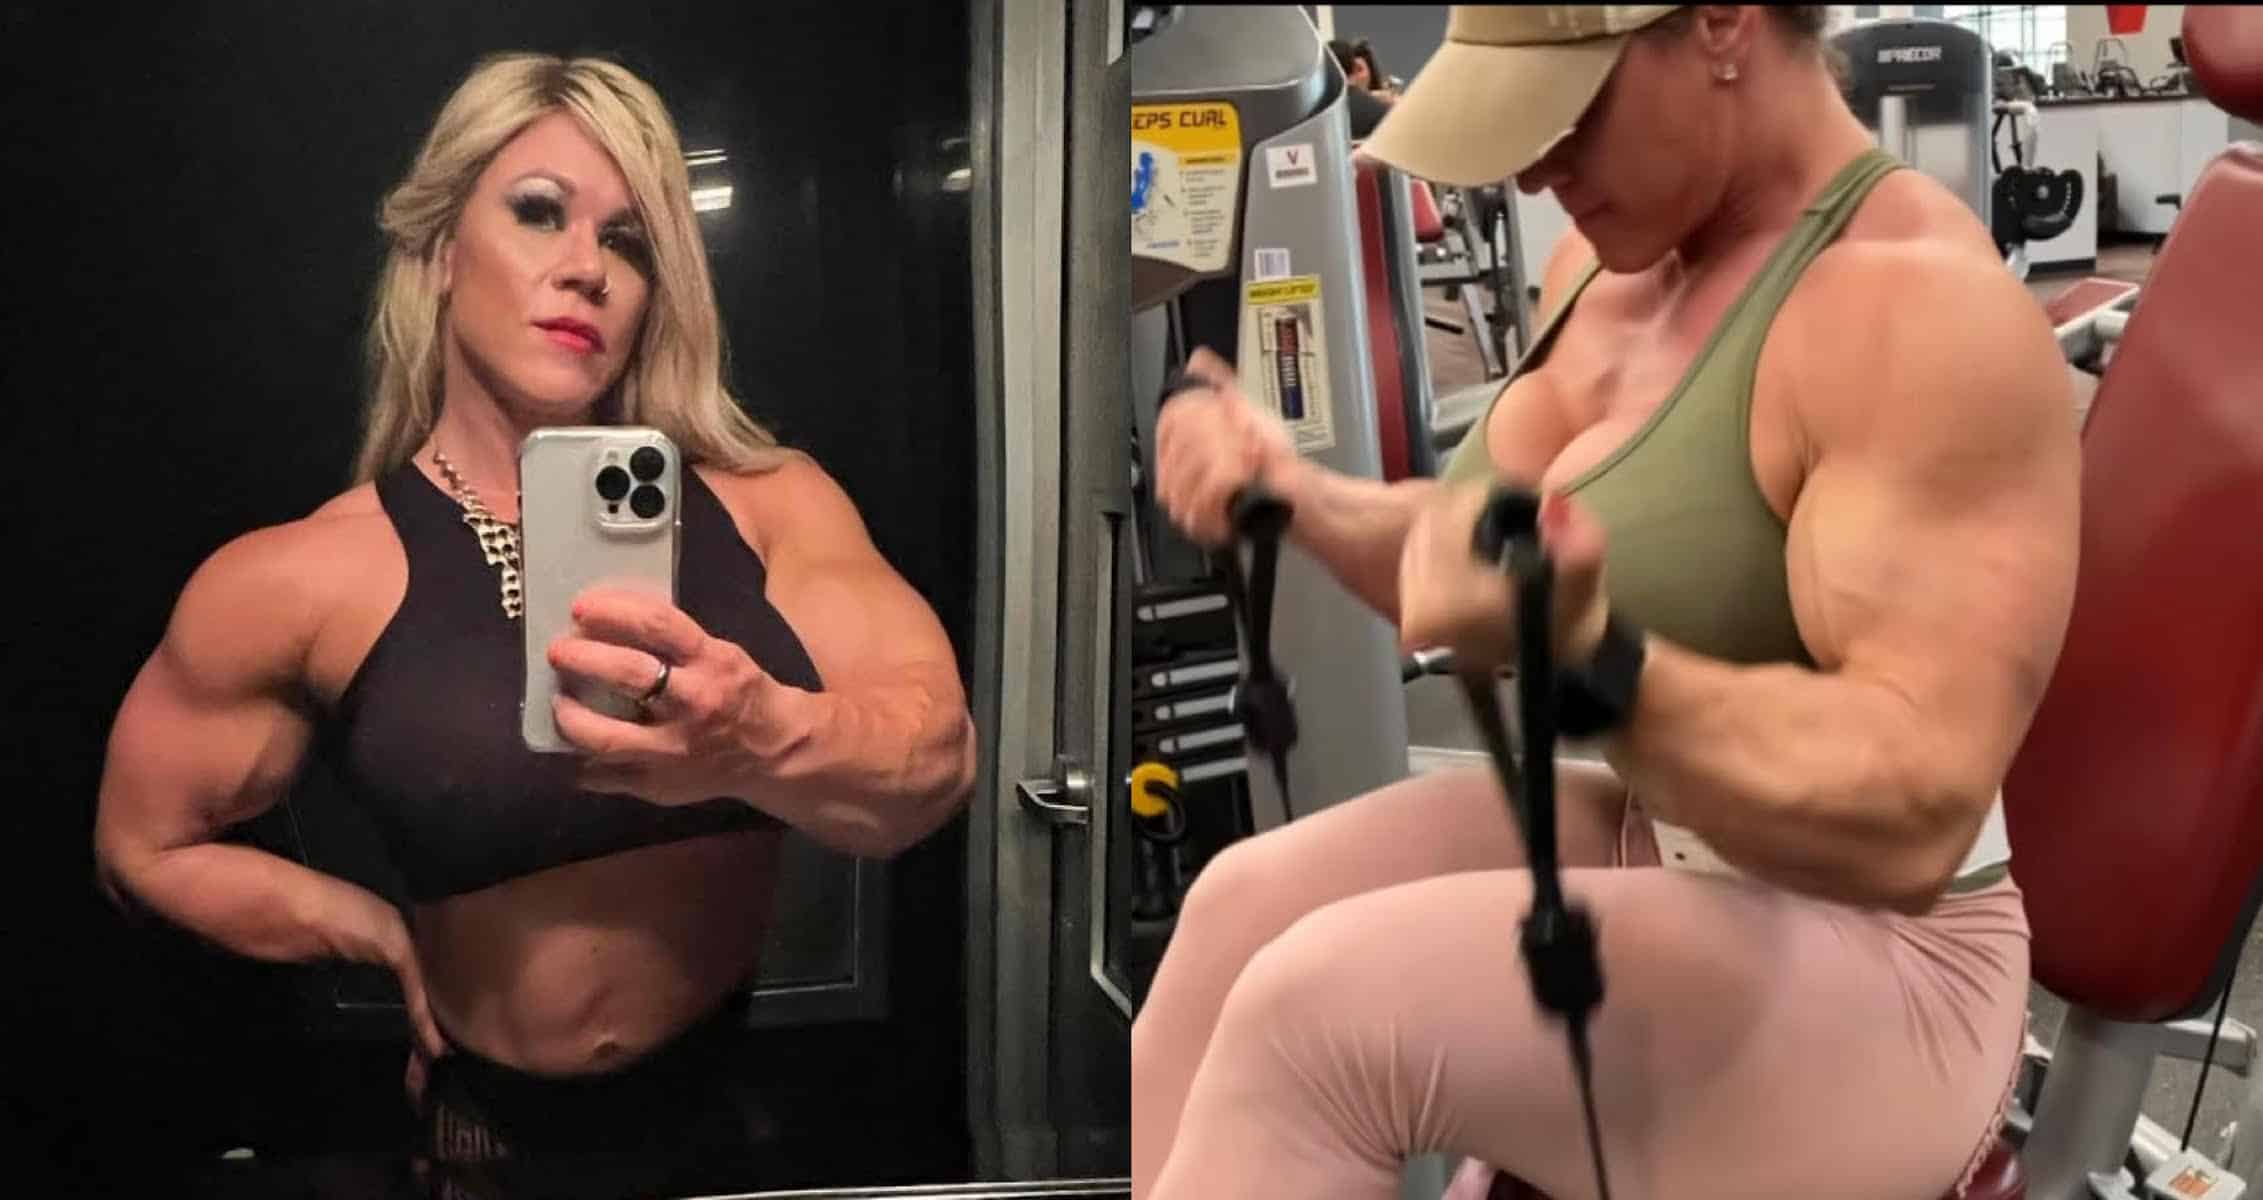 Female Bodybuilder Aleesha Young Shocked At Requests By Closet Muscle Lovers, Including Burping And Farting Videos image